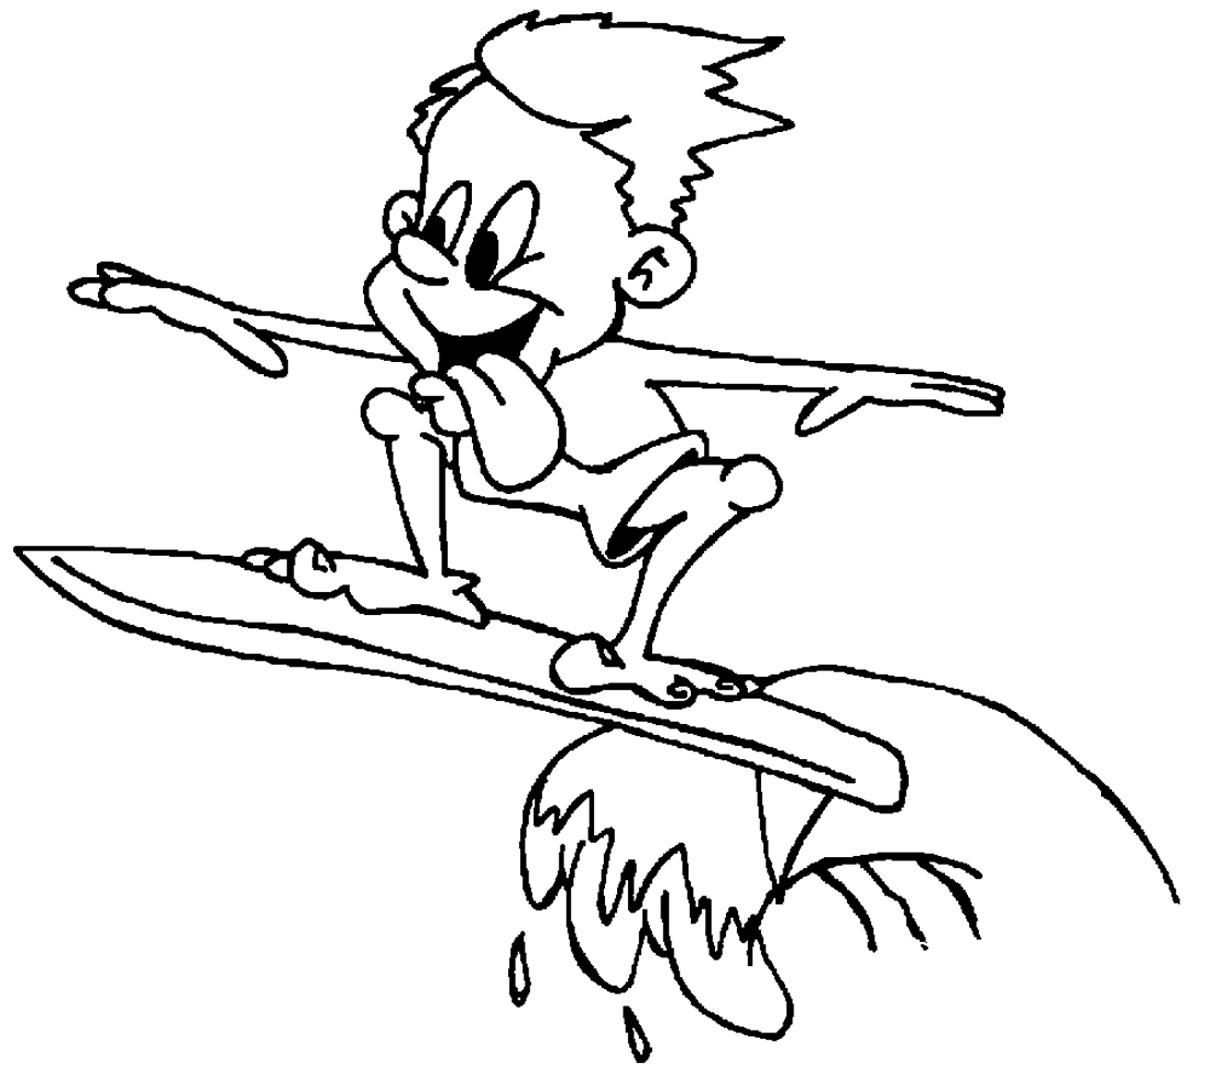 Surfing Coloring Pages
 Surfing coloring Download Surfing coloring